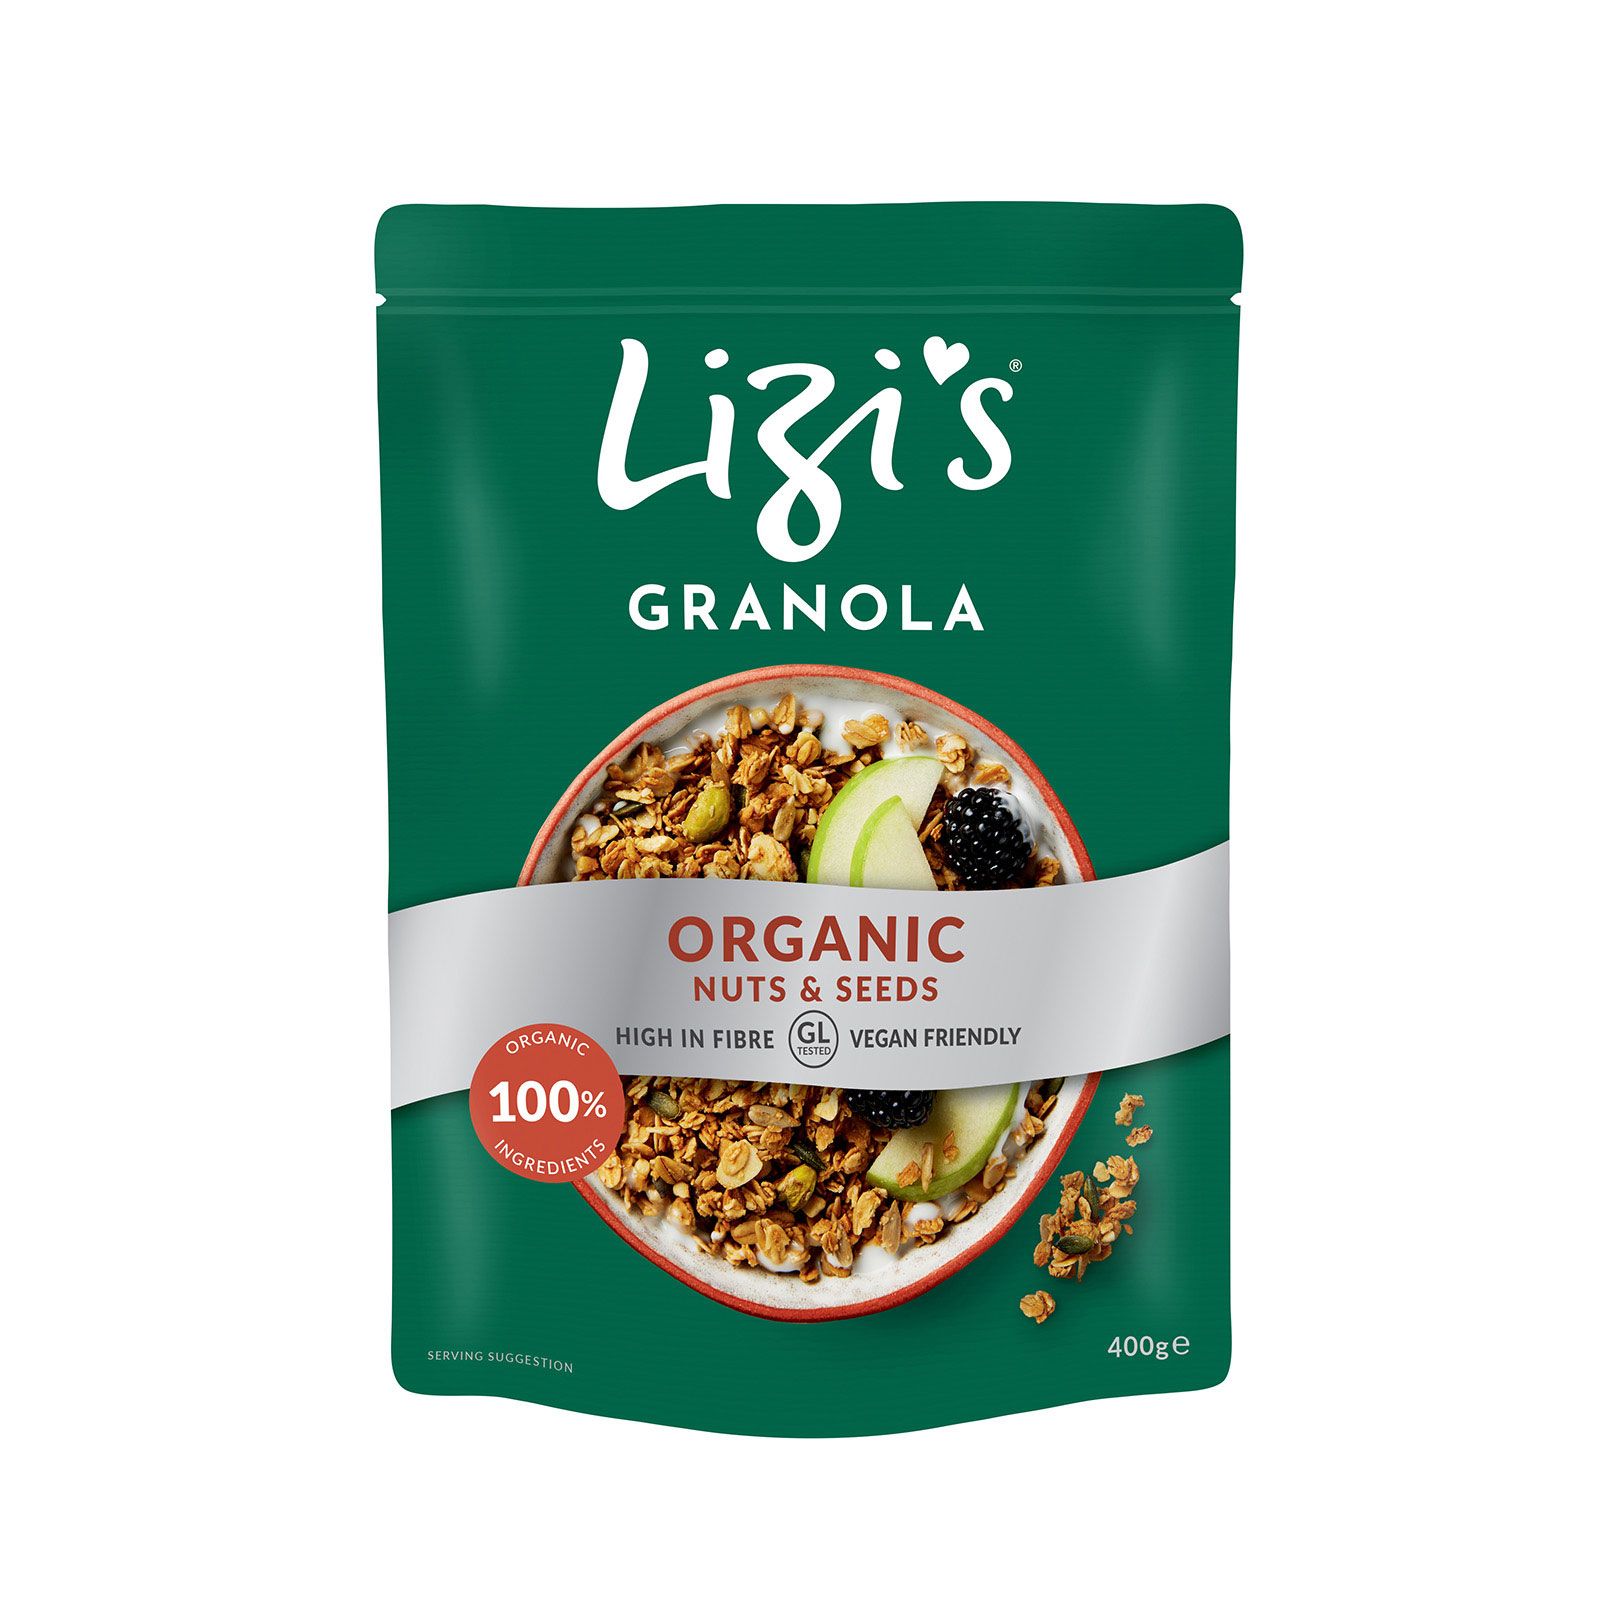 Organic Nuts and Seeds Granola - Image